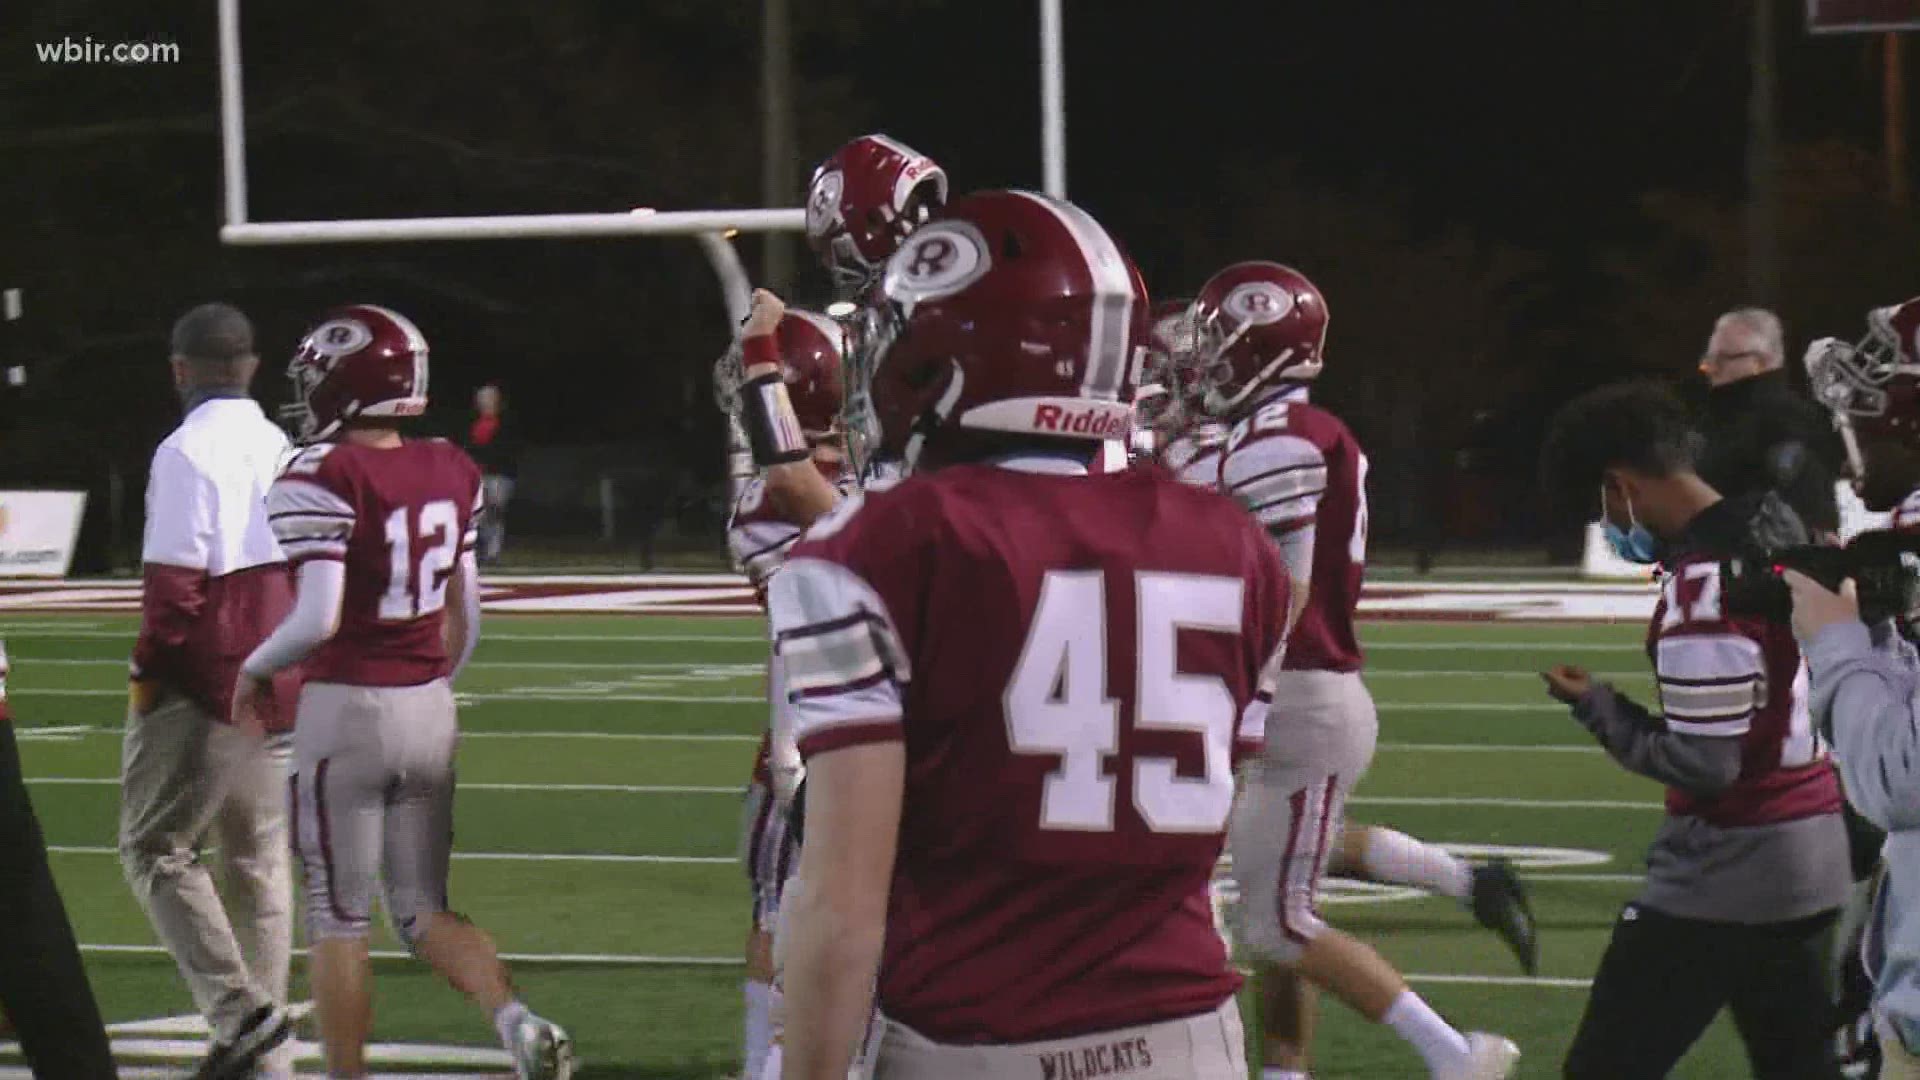 Oak Ridge beats Soddy-Daisy in the first round of the playoffs.